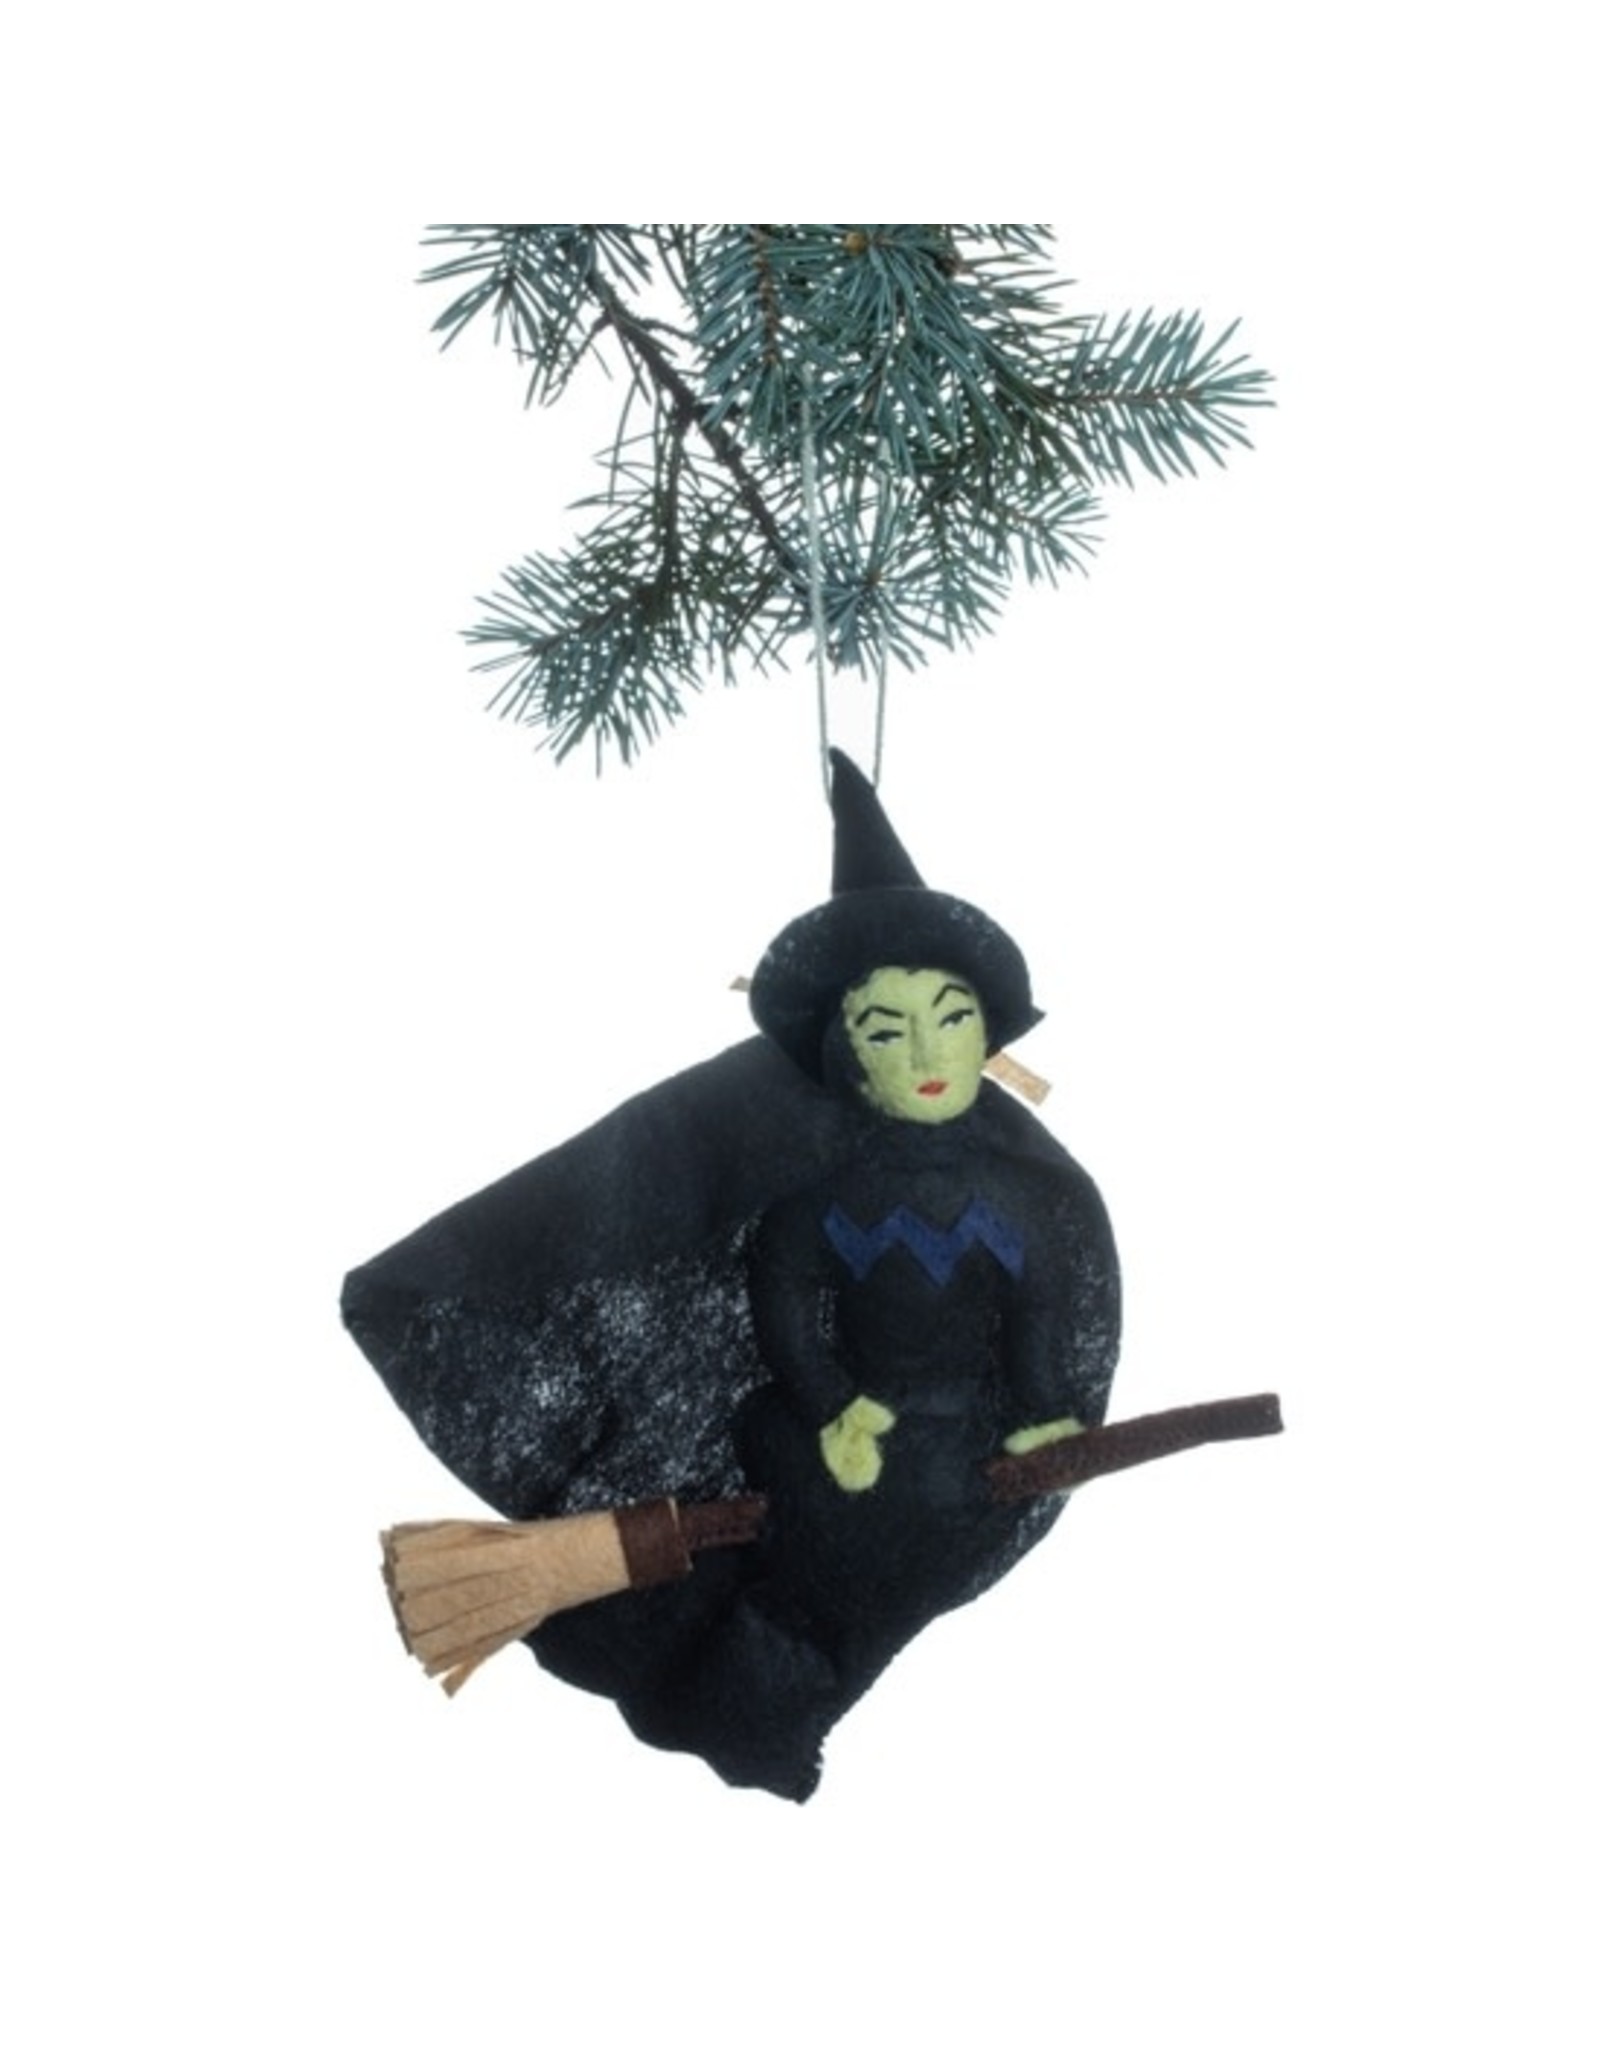 Wicked Witch of the West Ornament, kyrgyzstan